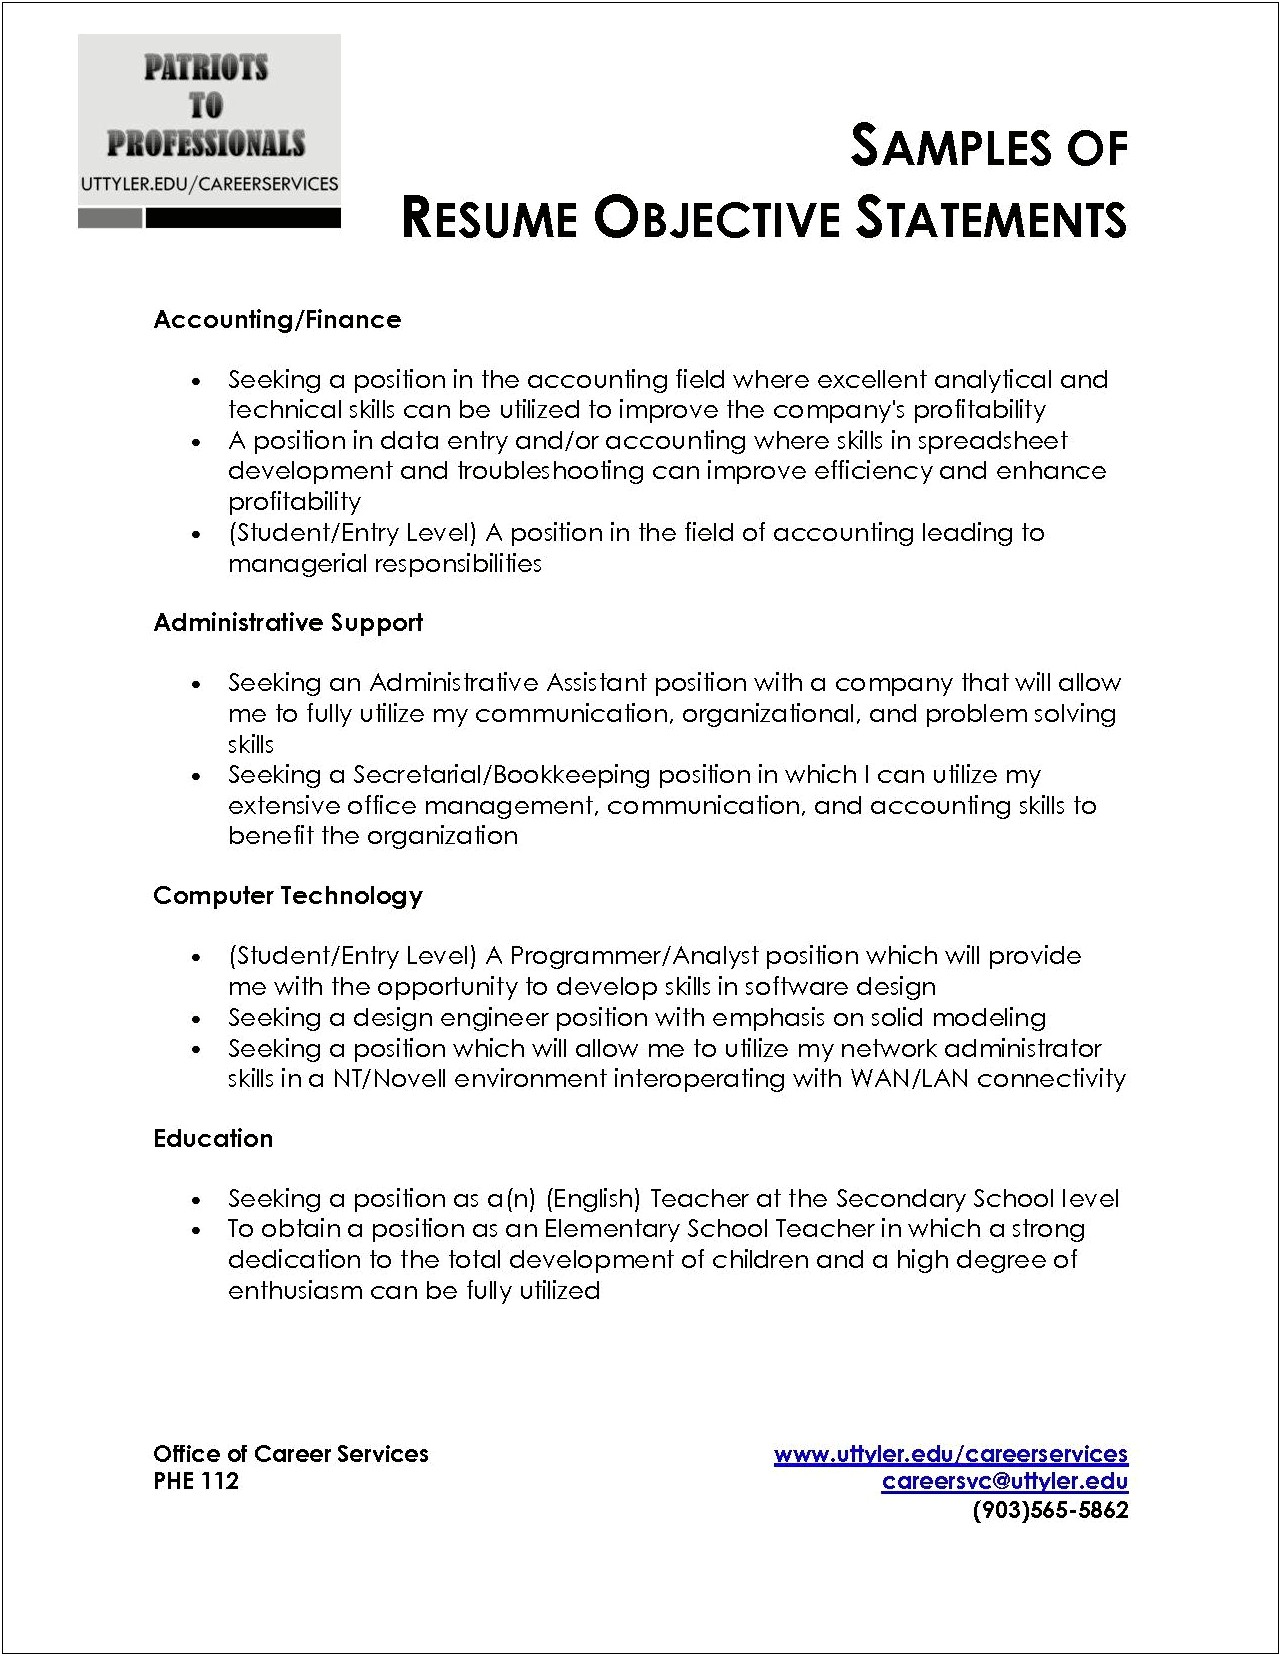 Career Objective Statement For Resume For An Accountant